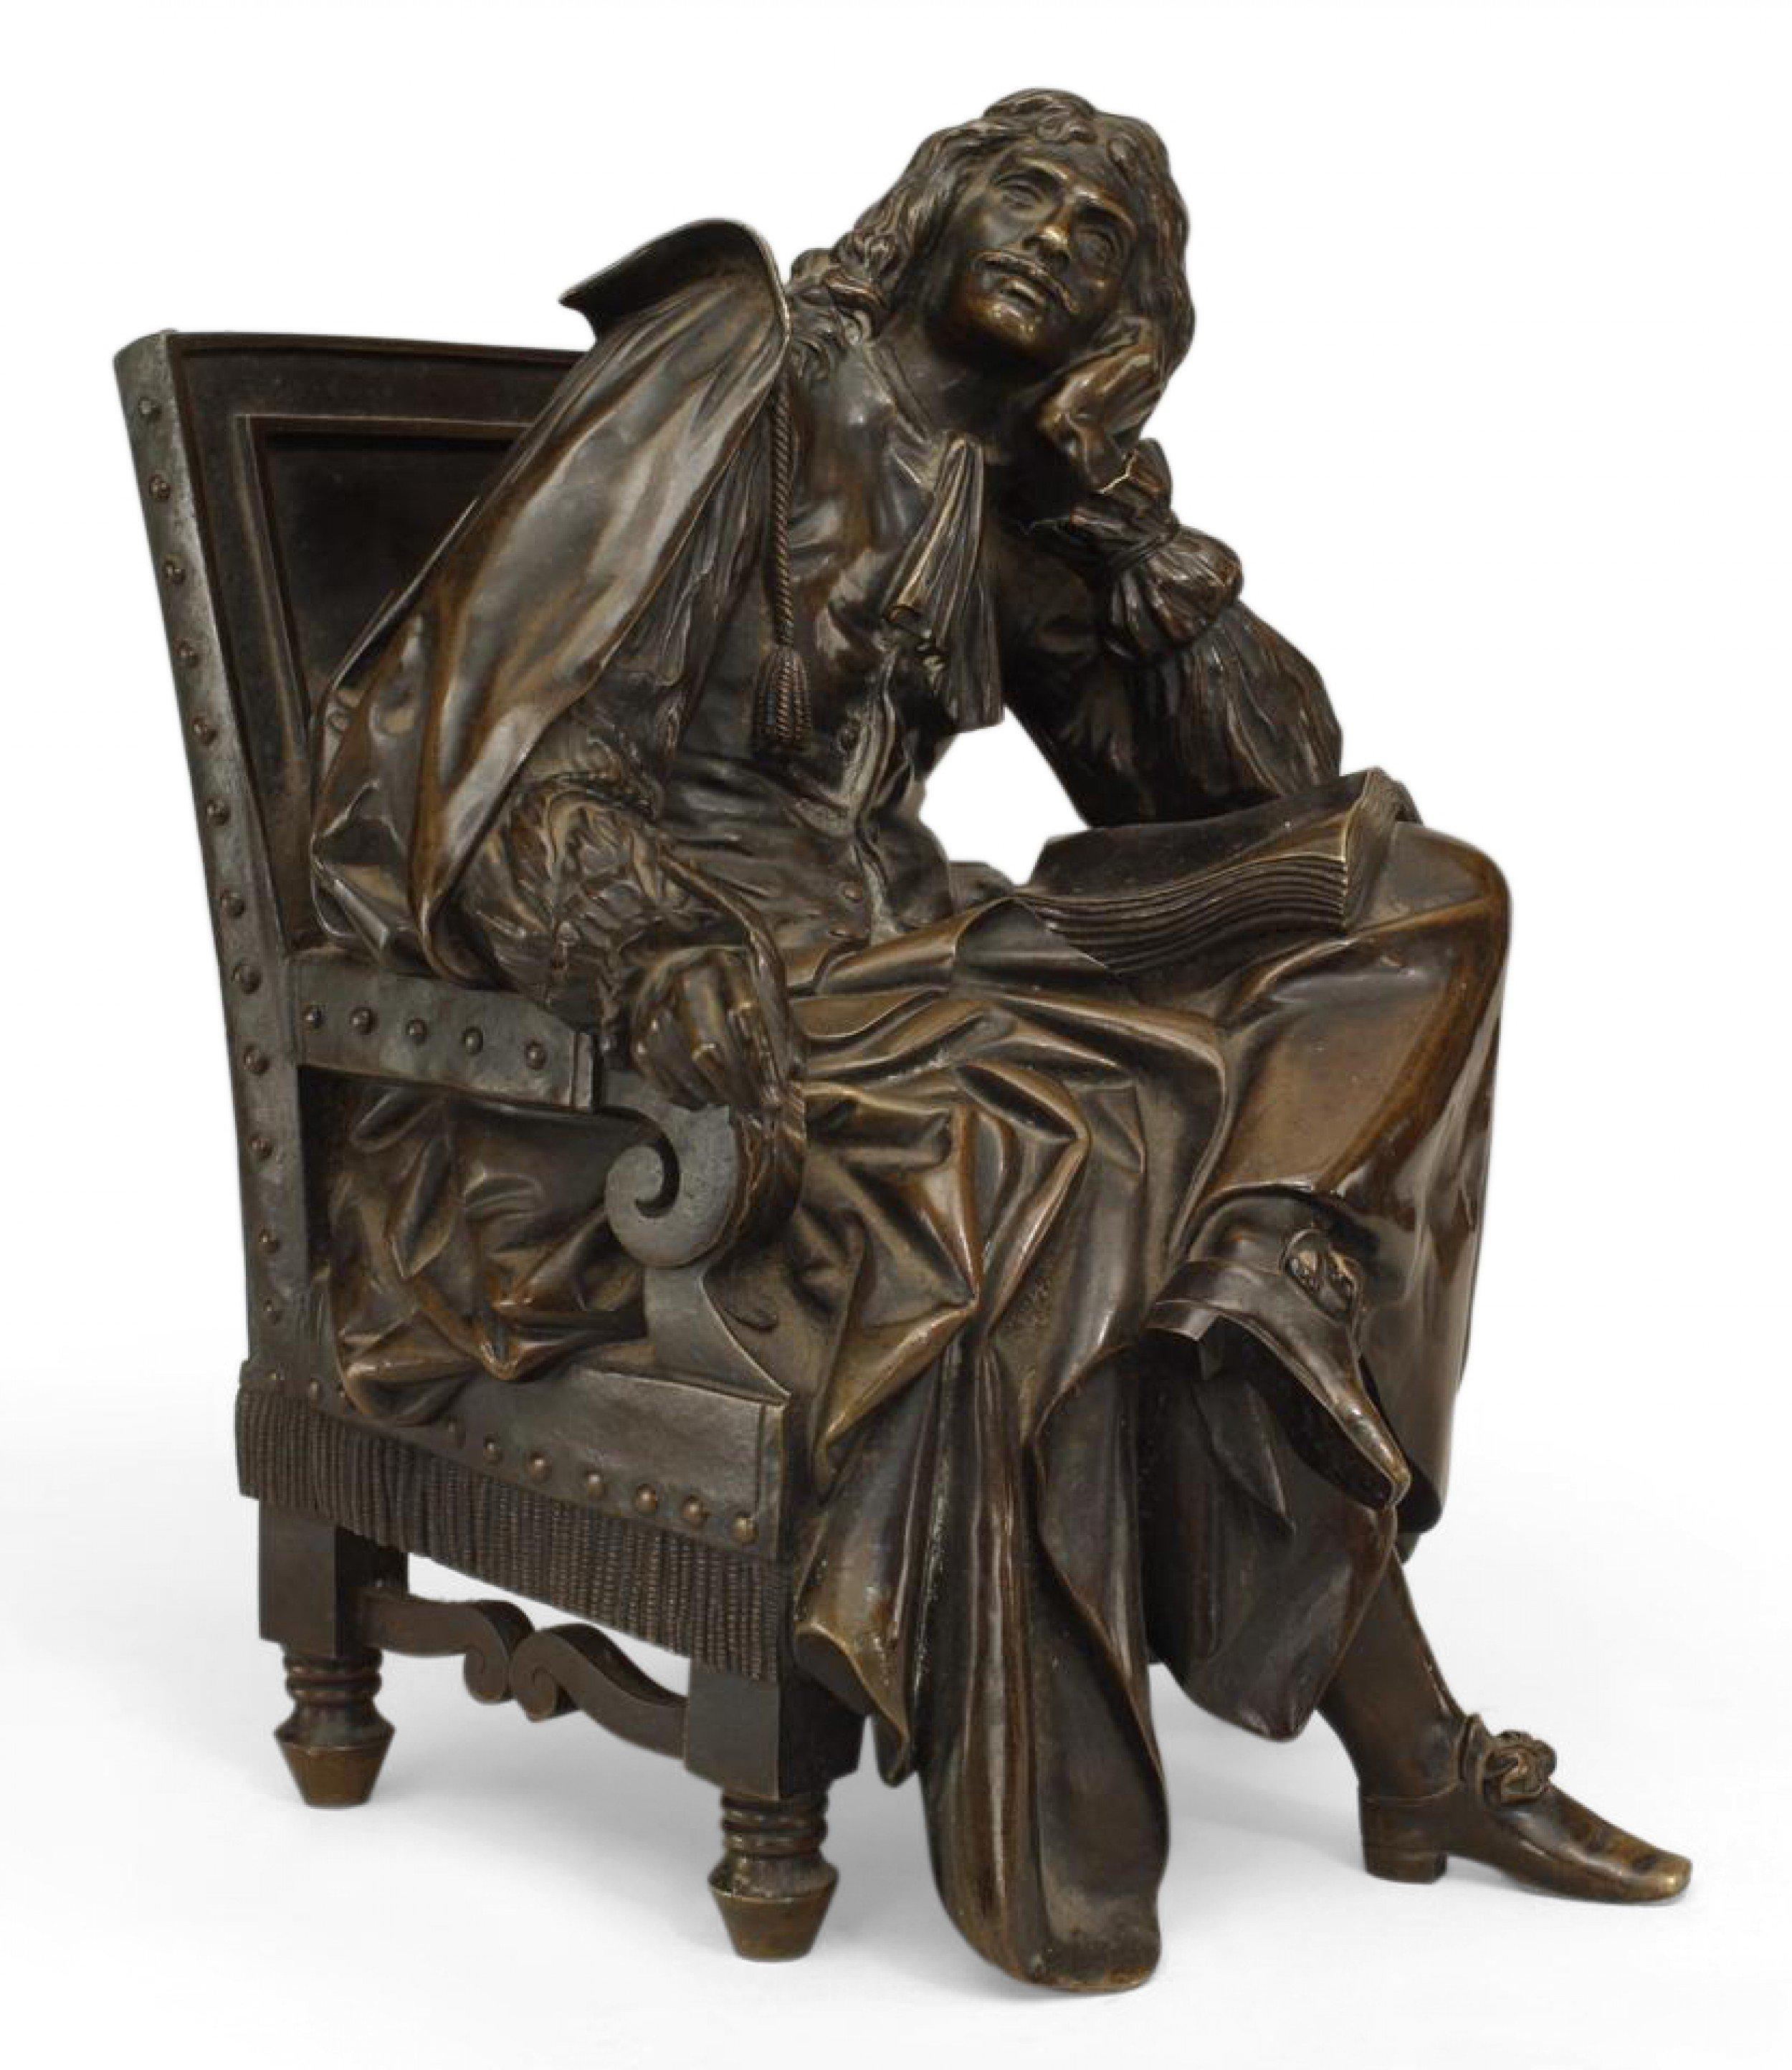 French (19th Cent) bronze of 17th century figure with book and quill sitting in chair (signed PRADIER)
      